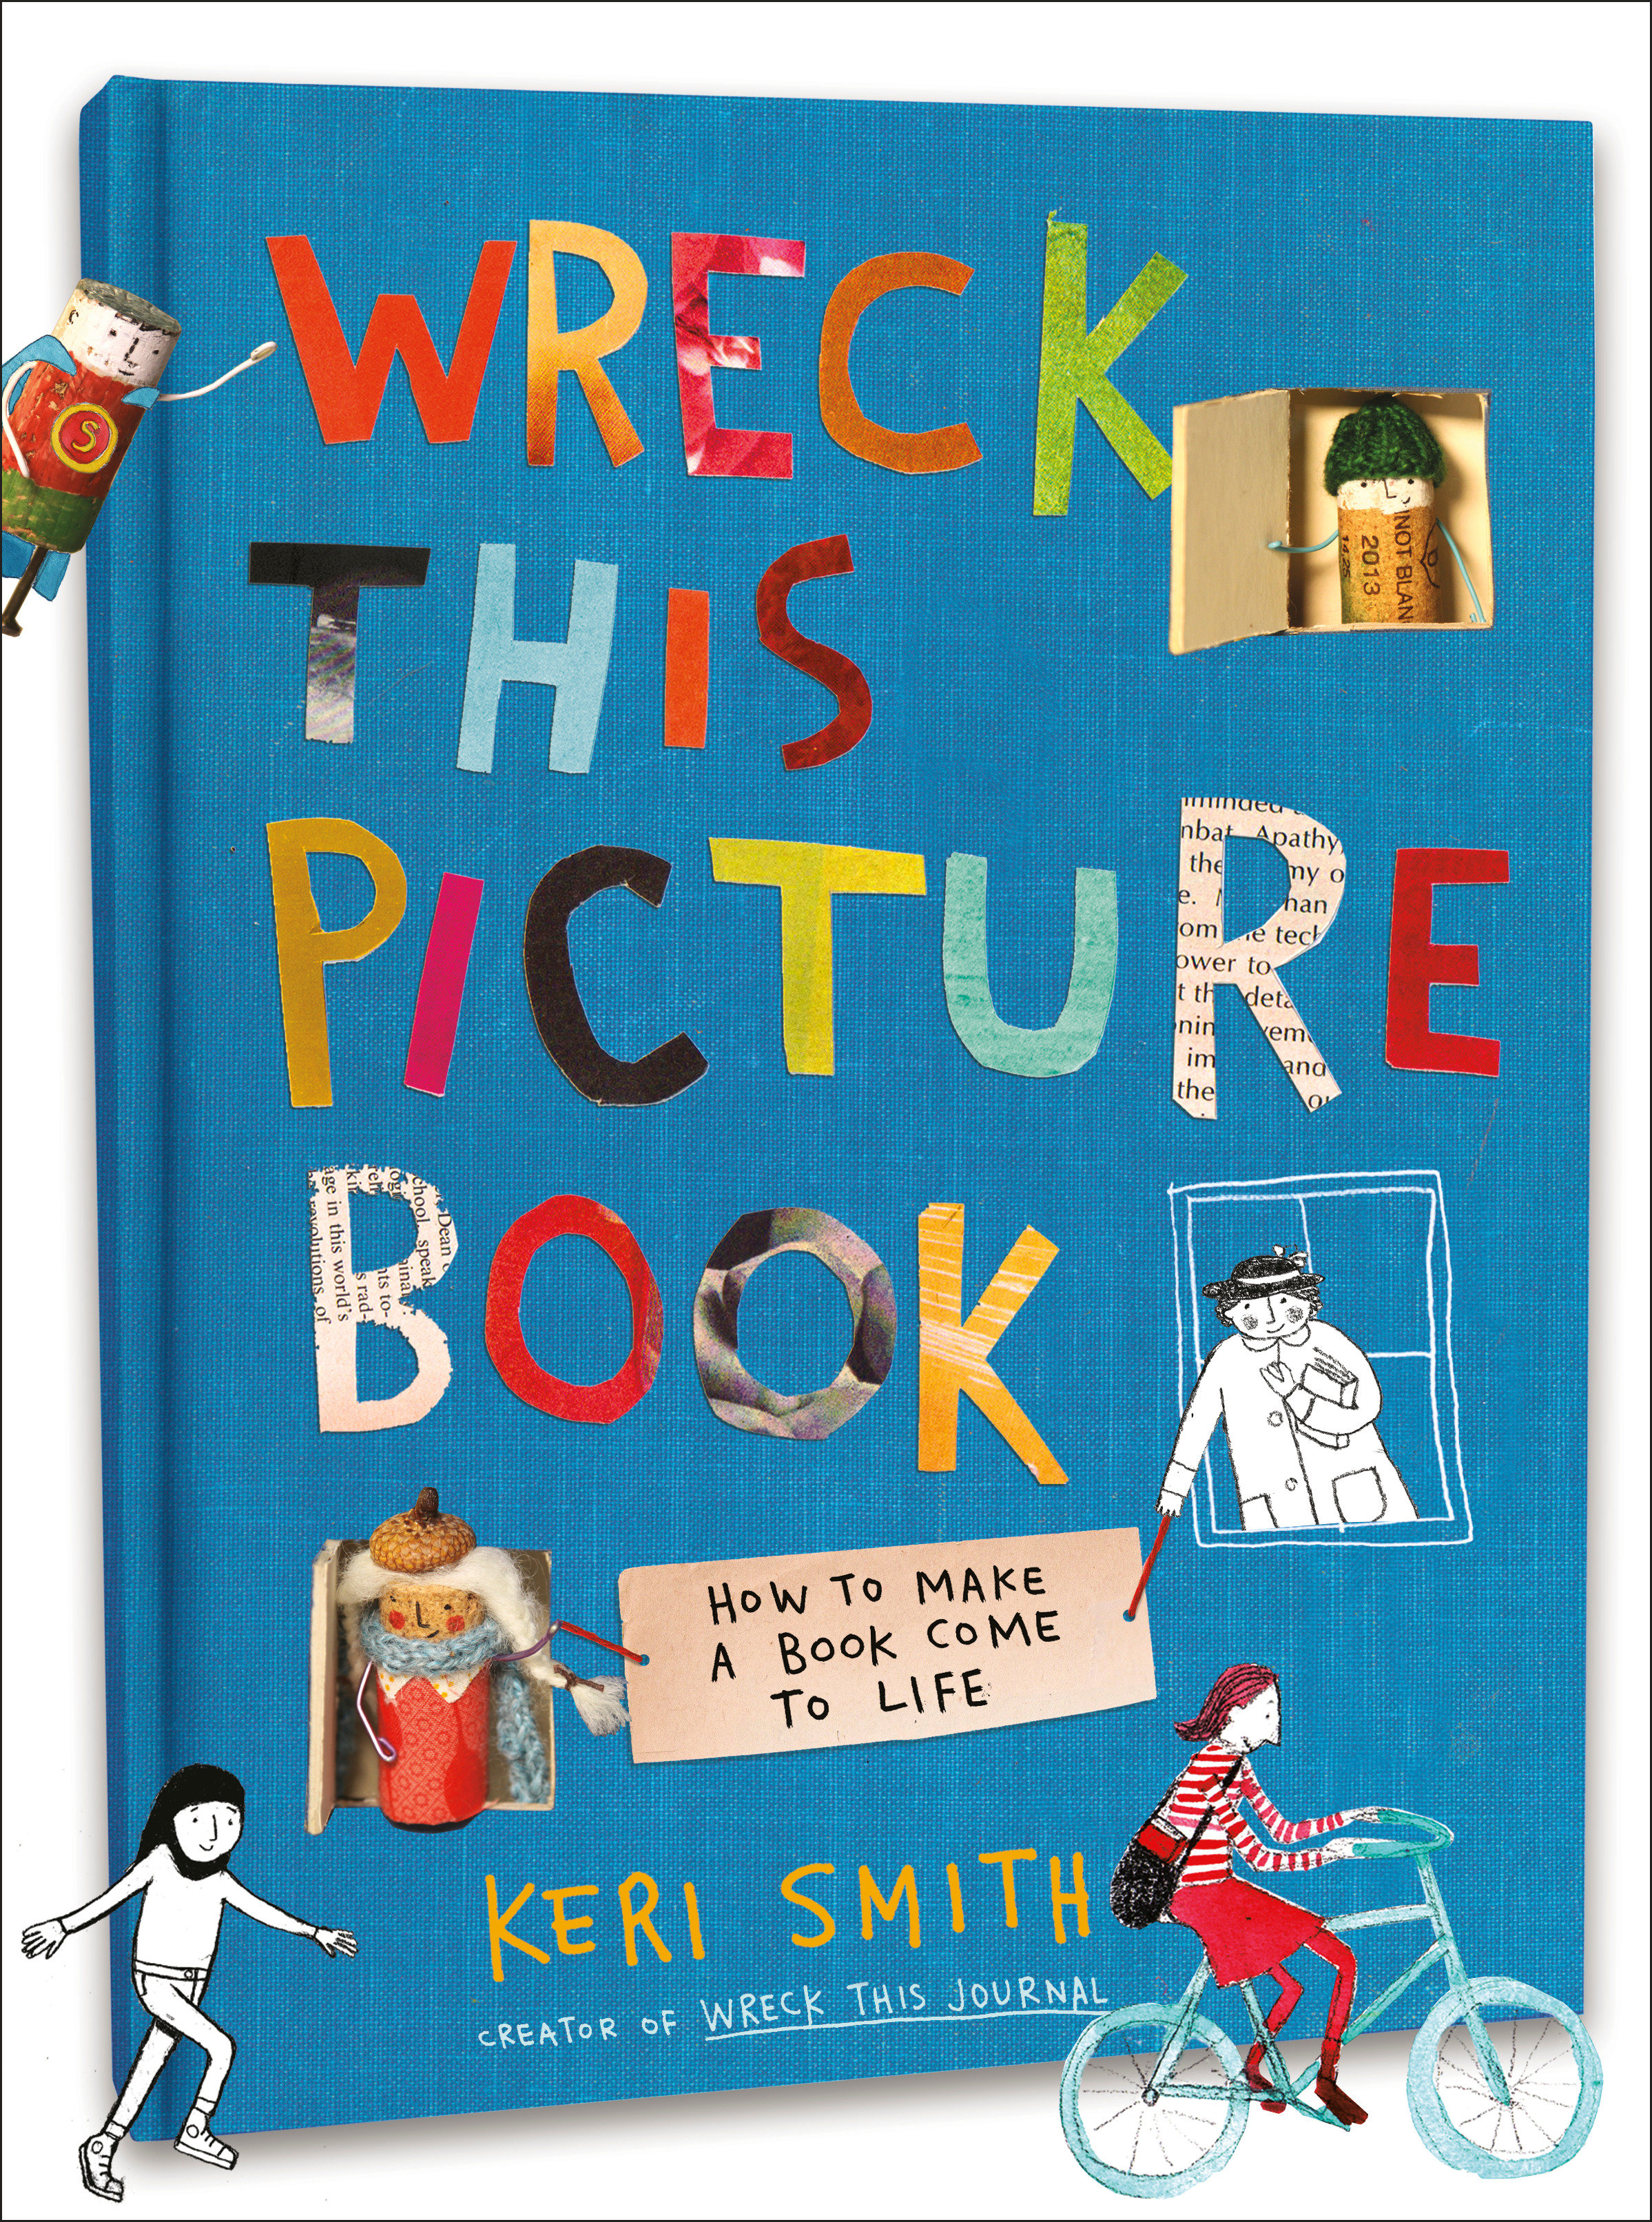 Wreck This Picture Book (Hardcover Book)